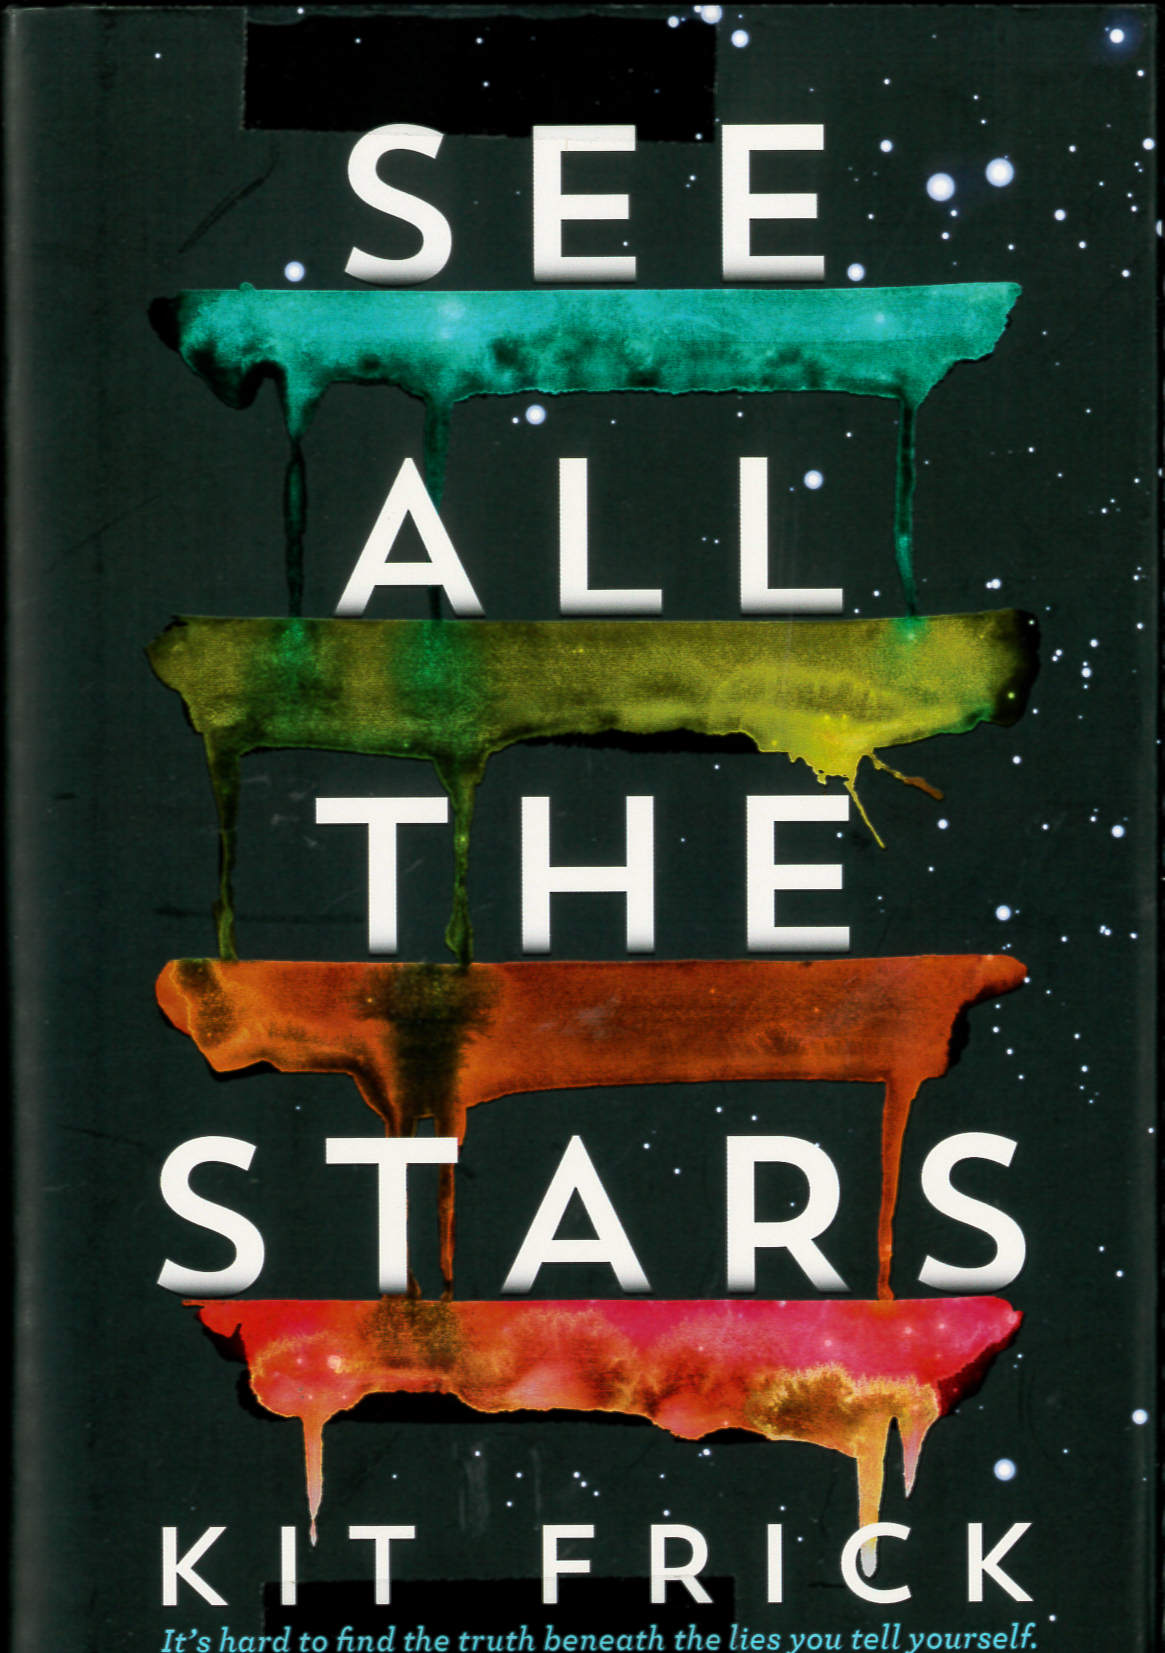 See all the stars /